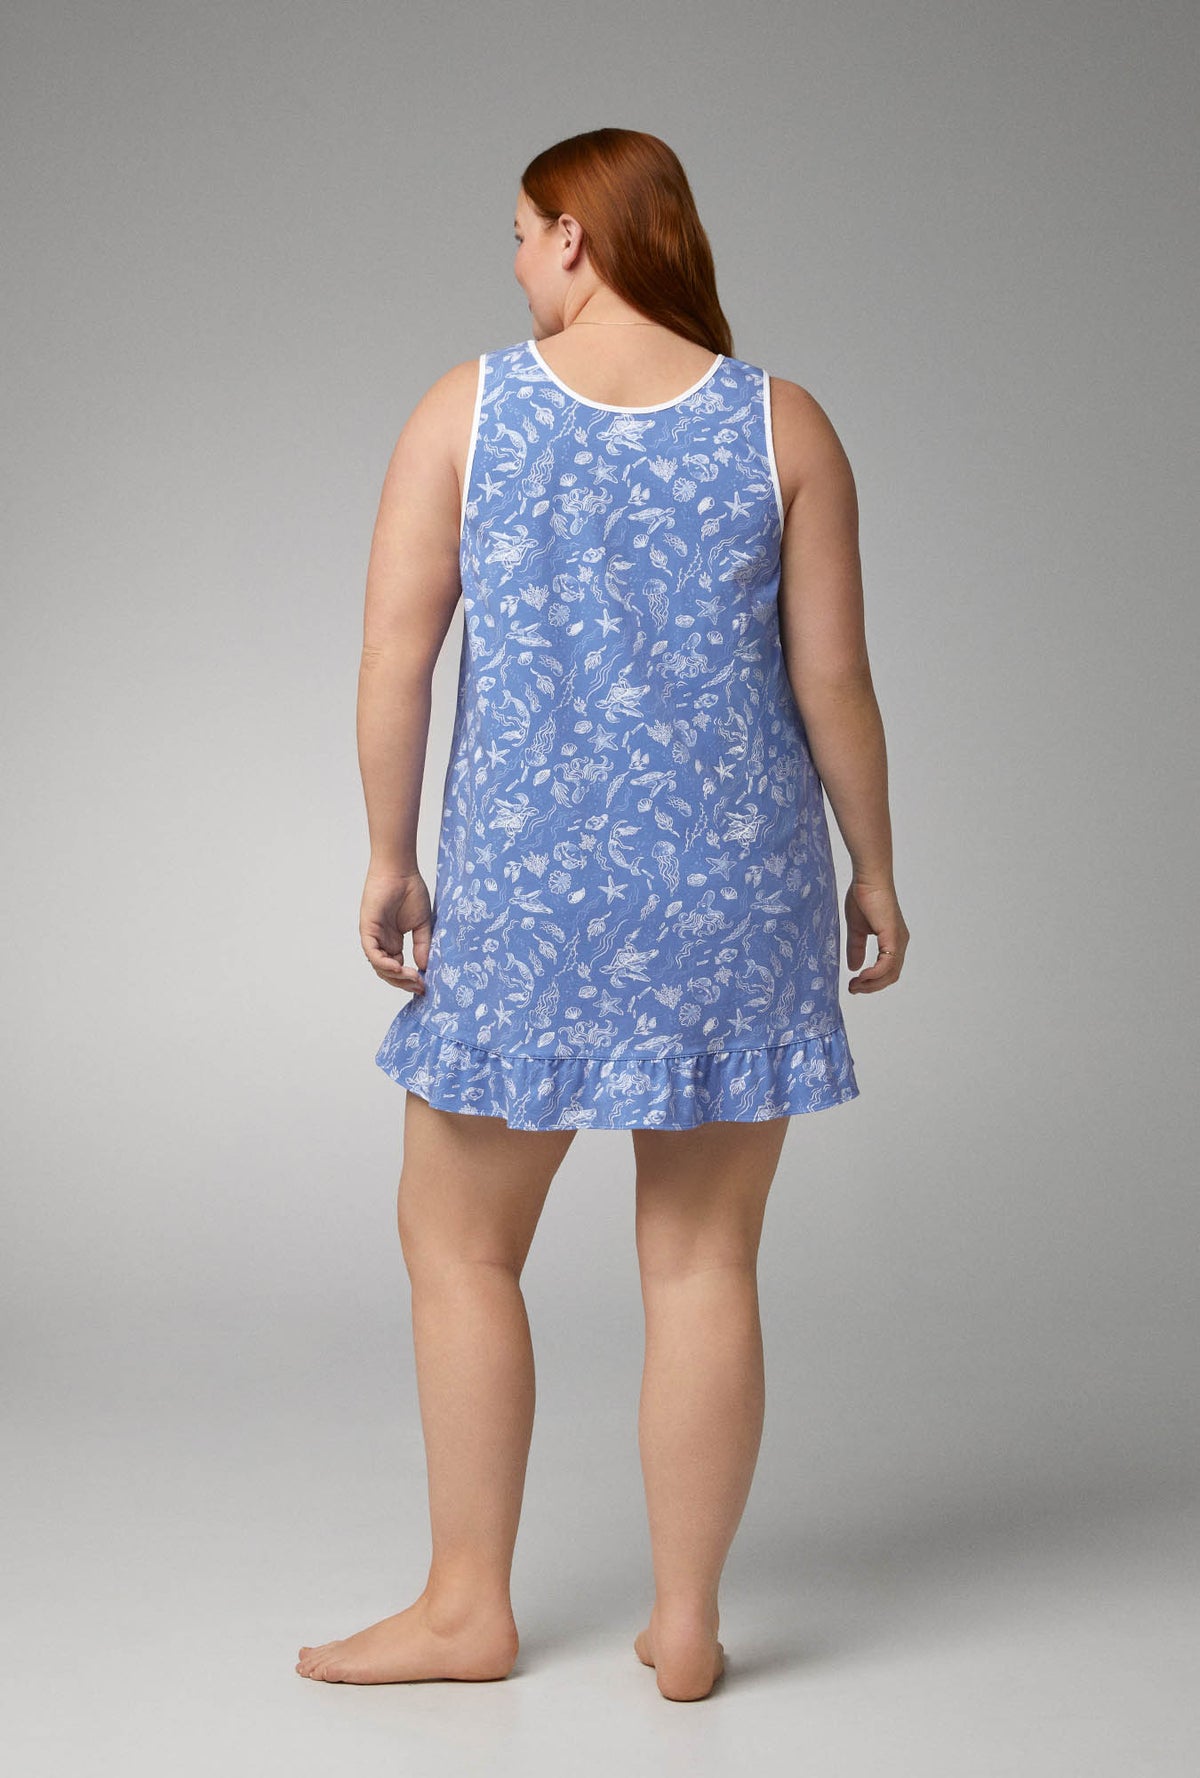 A lady wearing blue sleeveless ruffle stretch jersey plus size chemise with high tide print.